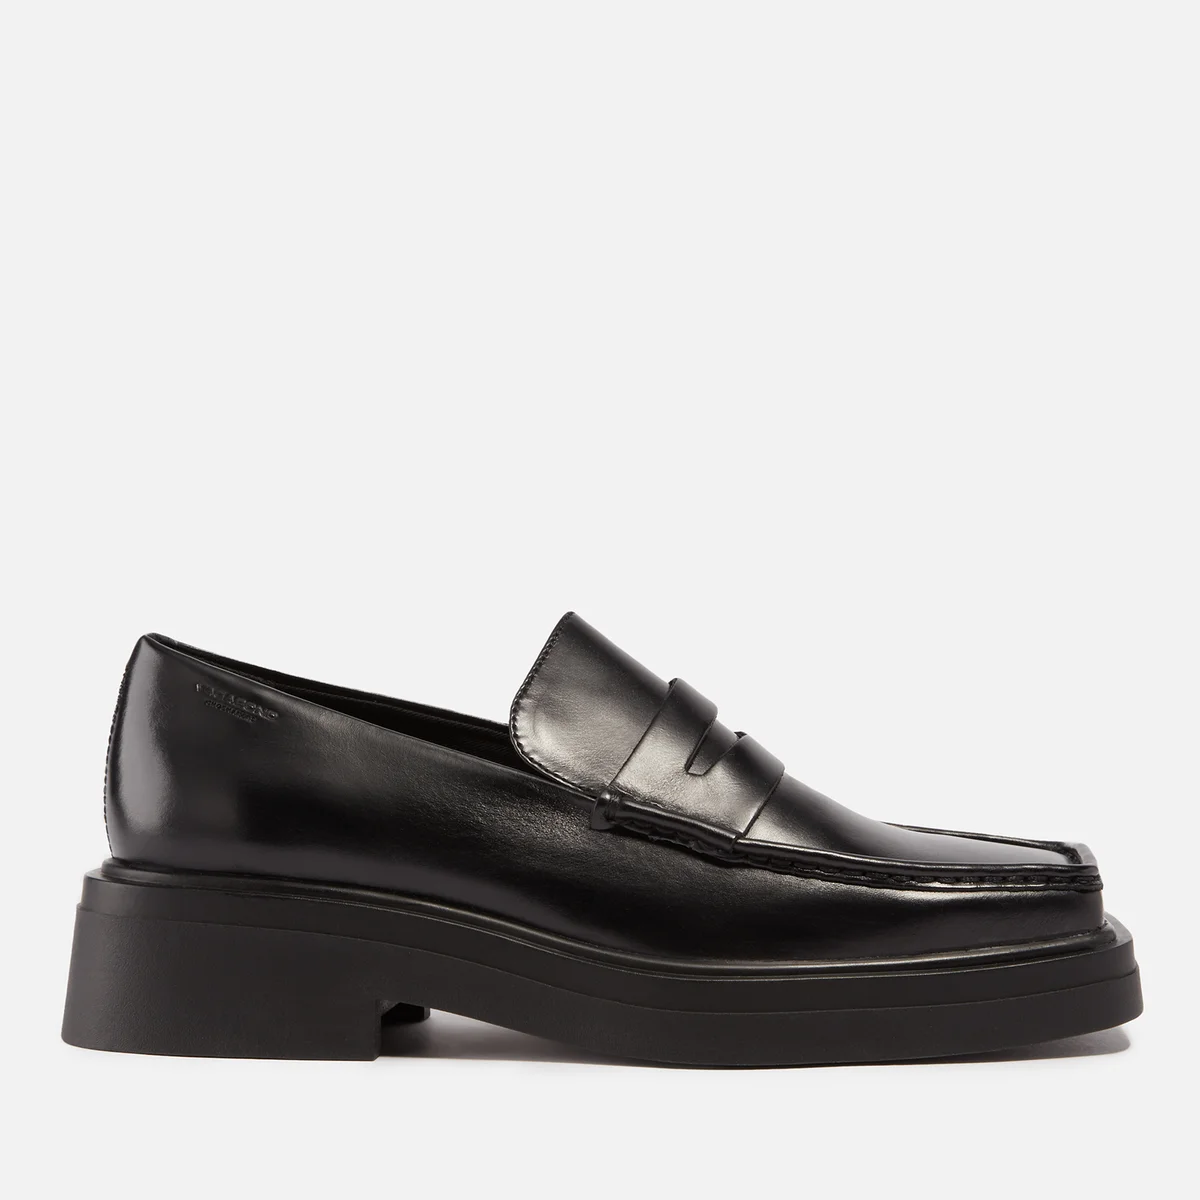 Vagabond Eyra Square Toe Leather Loafers Image 1